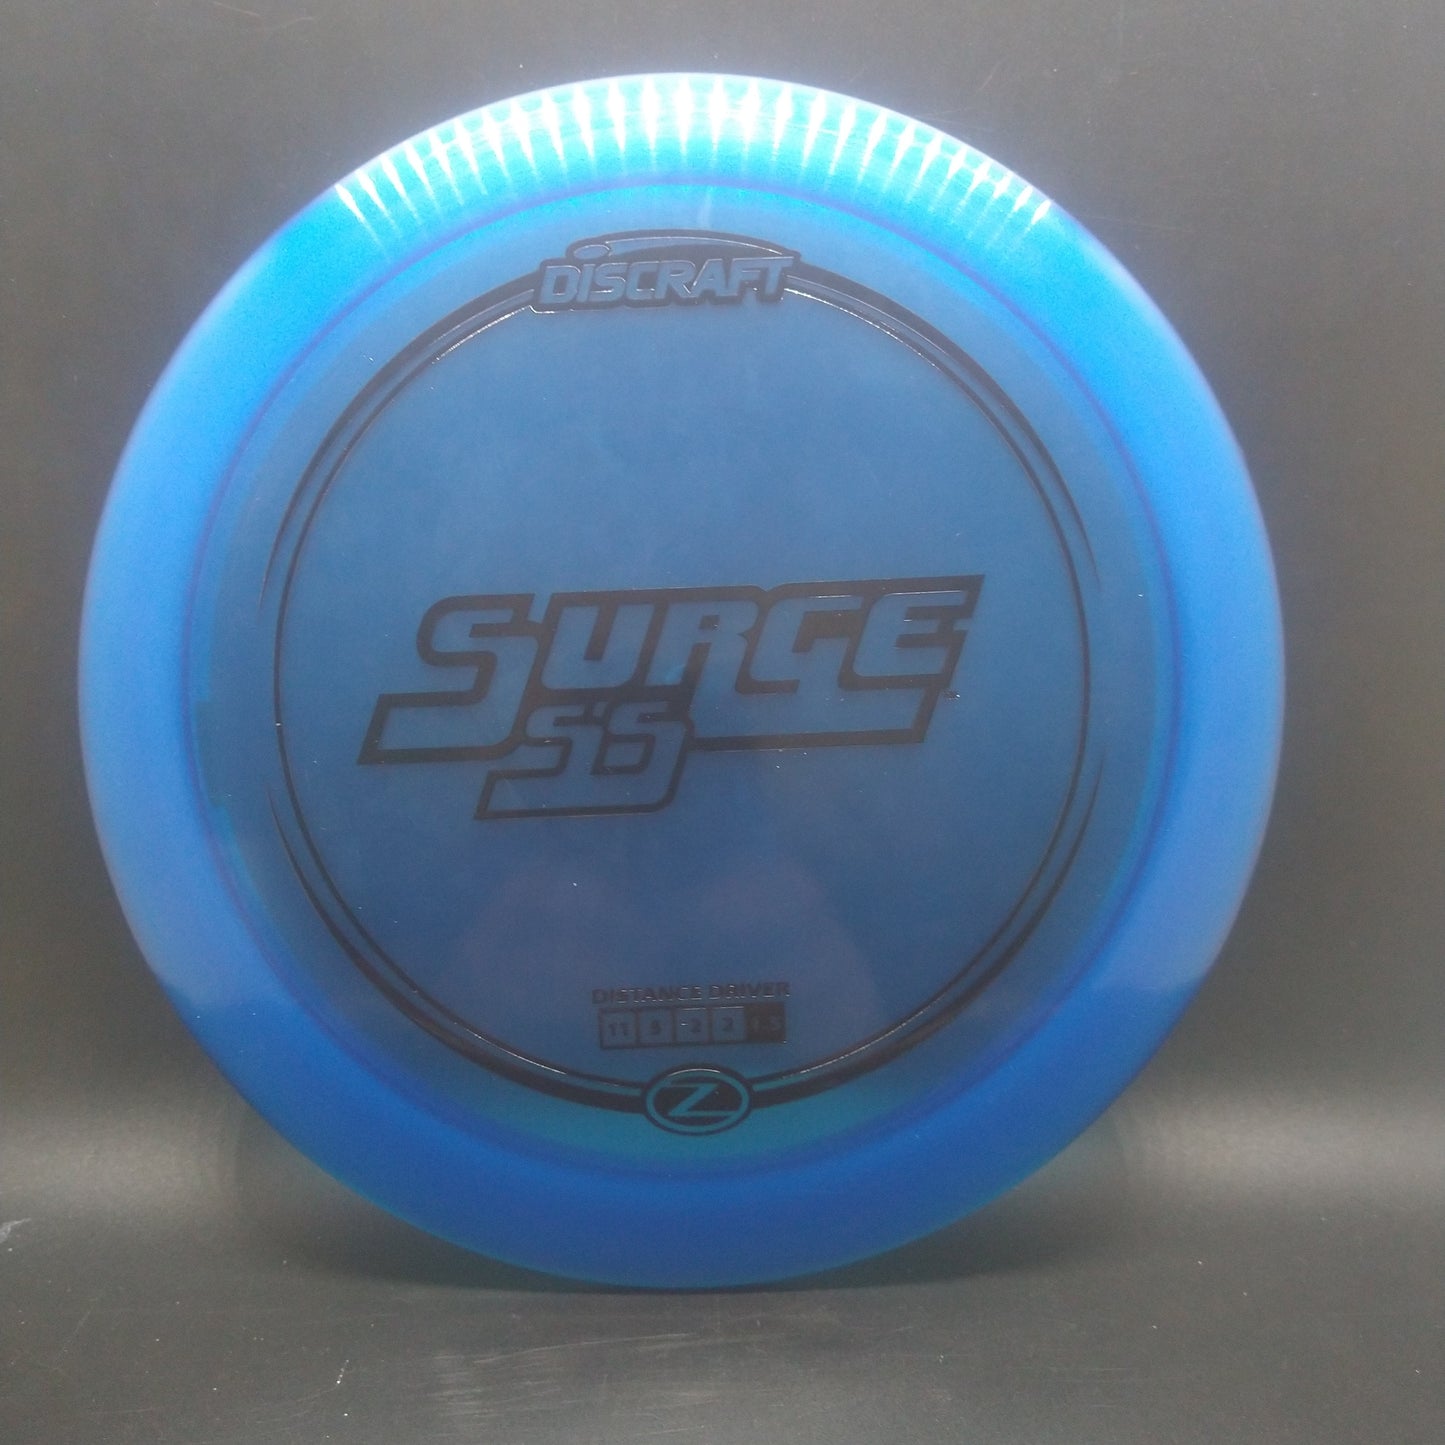 Discraft Z Surge SS blue with black stamp 173-4g